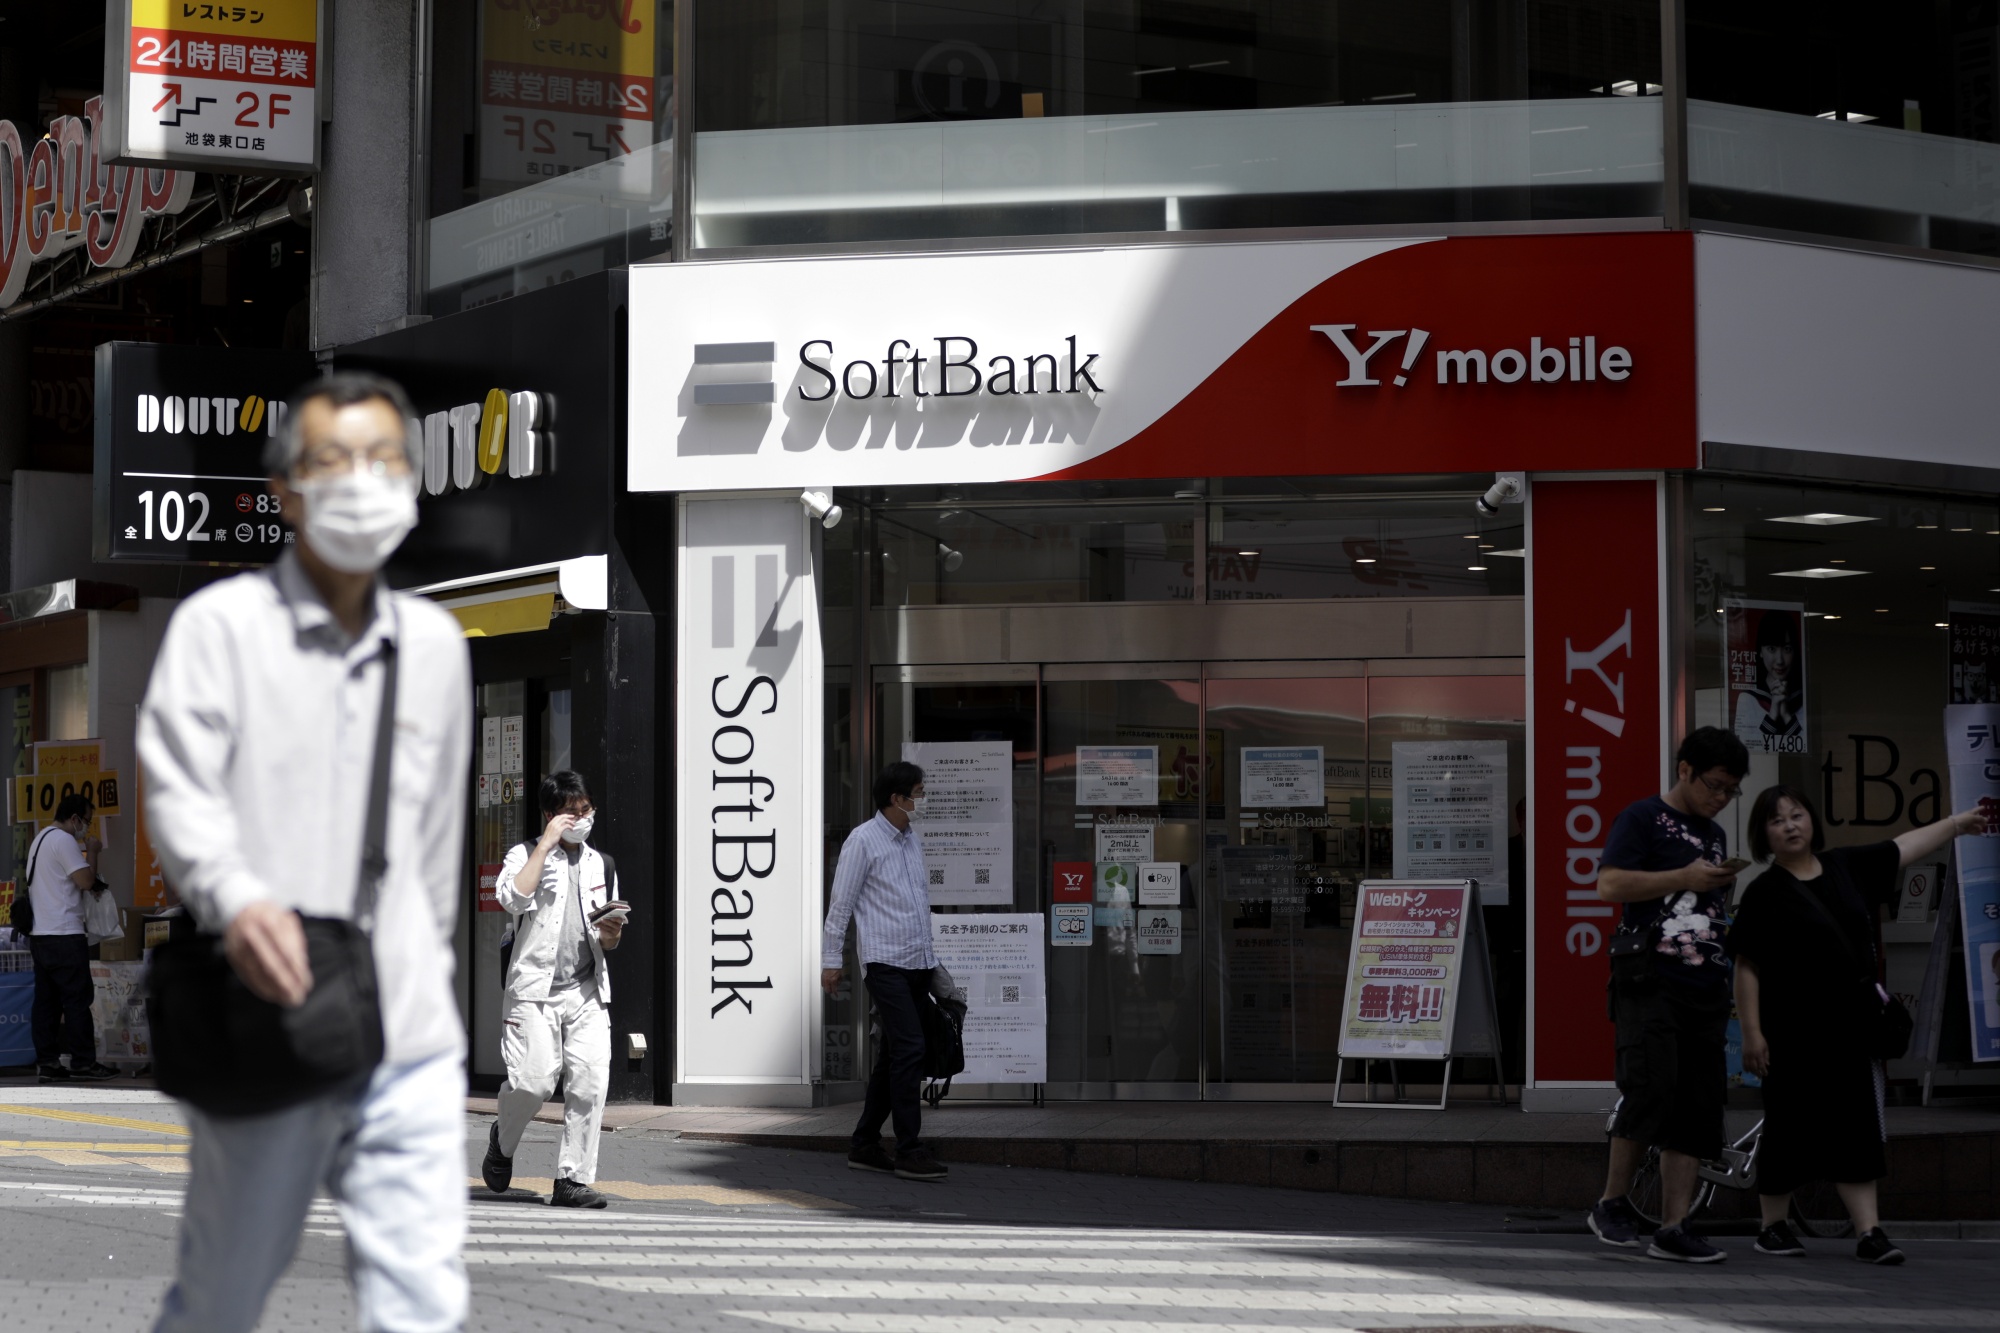 SoftBank Stores As The Group Heads For Record Loss